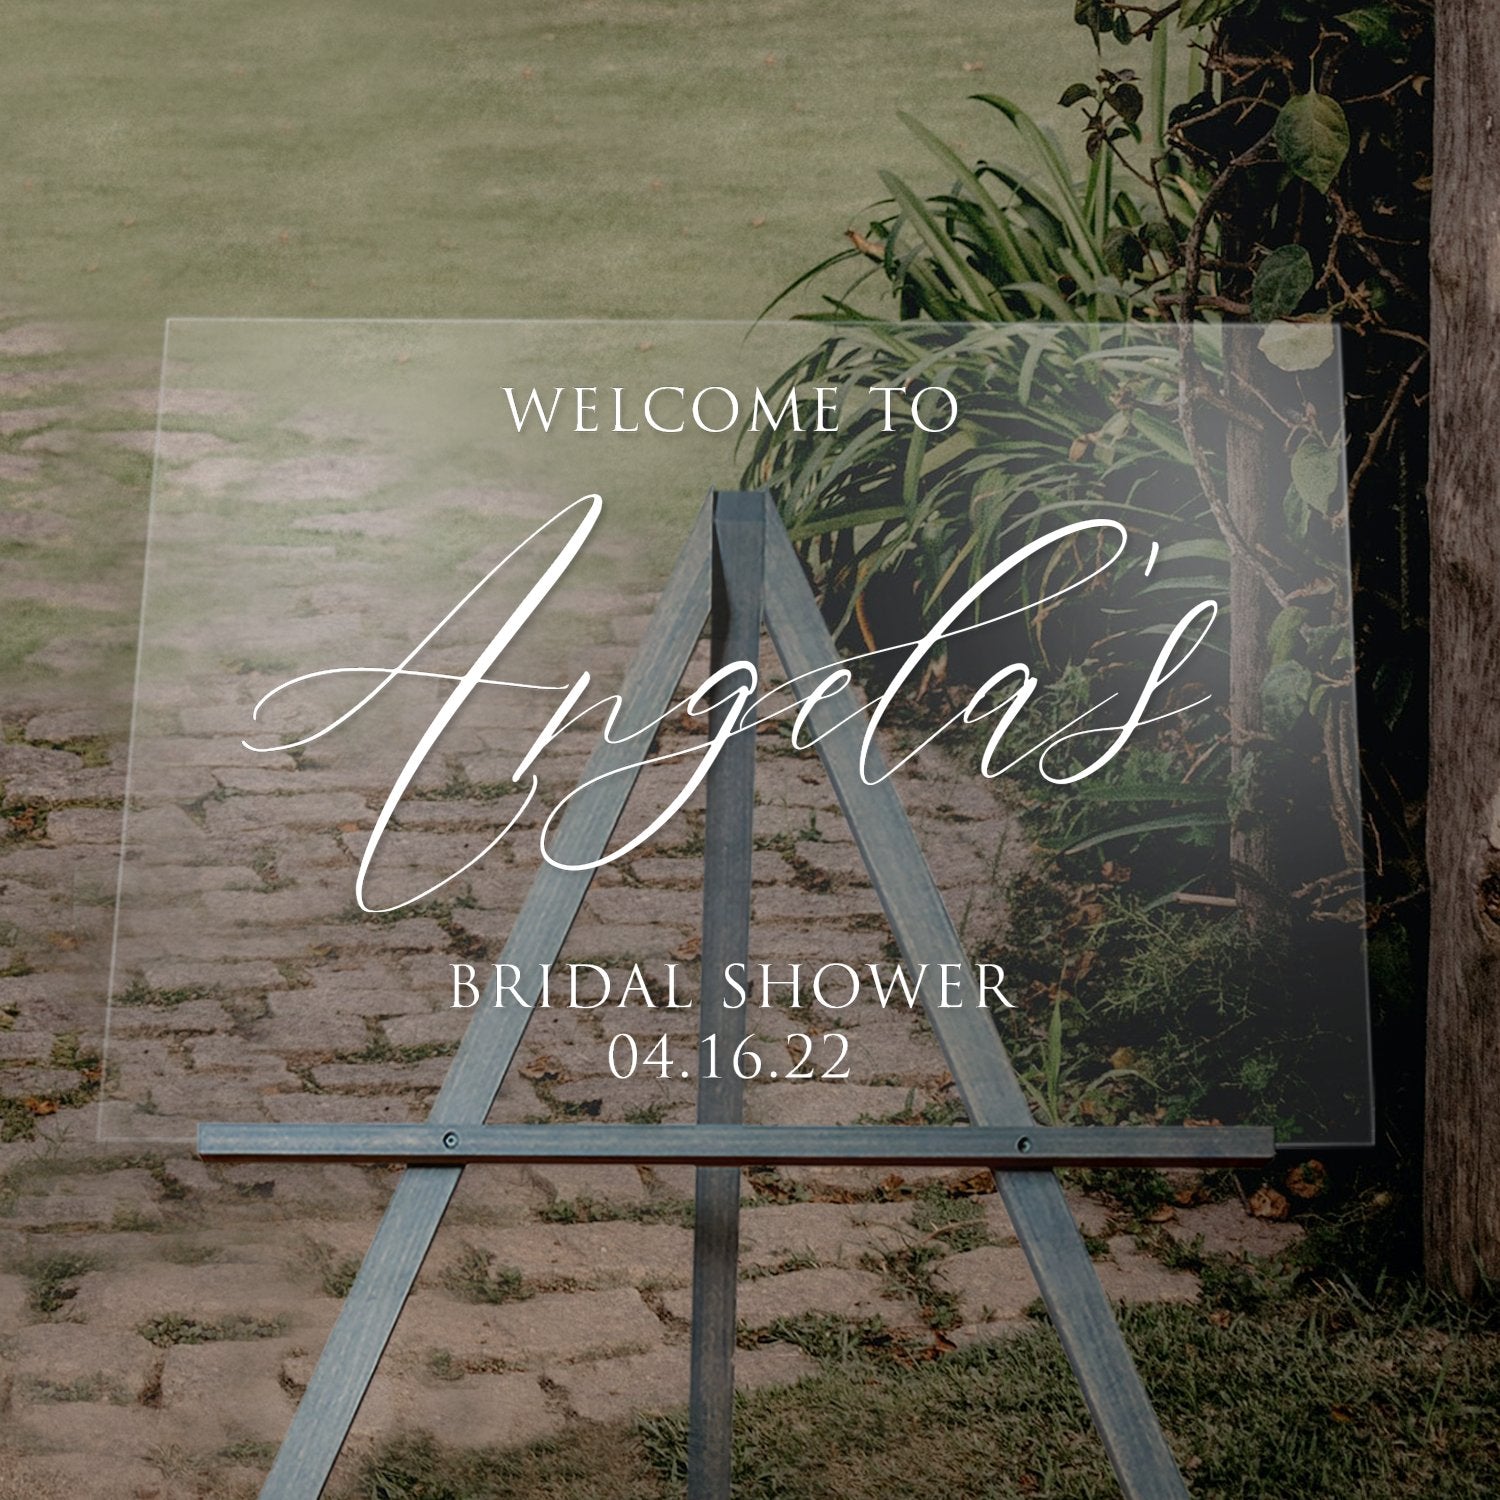 Welcome guests in style with our Acrylic Bridal Shower Sign – a personalized addition to create a memorable celebration.